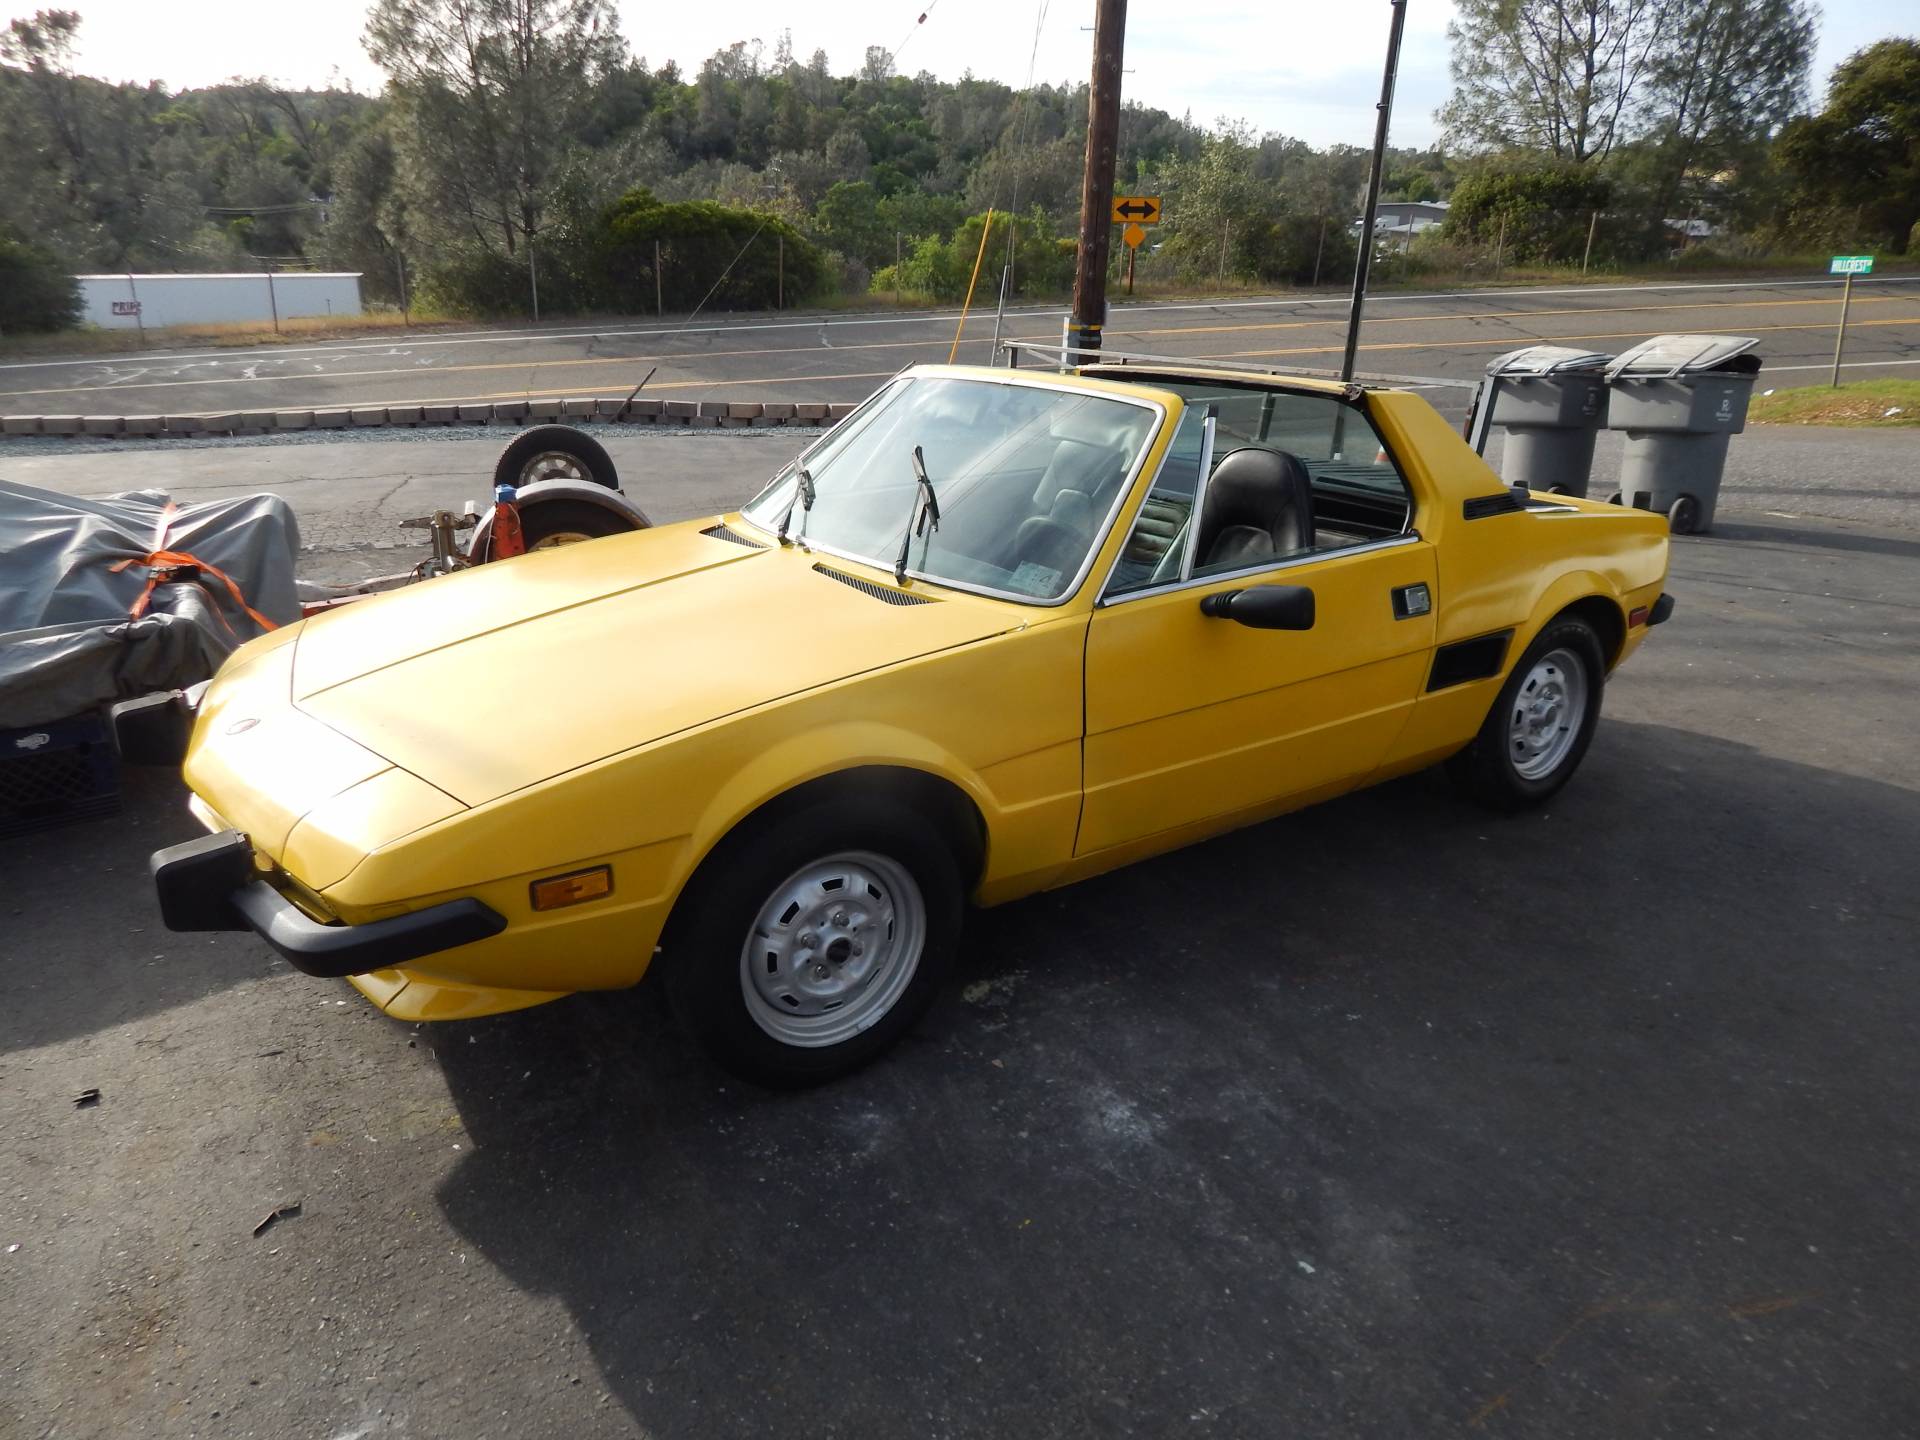 FIAT X 1/9 - SEE ON EBAY TODAY TO BUY!